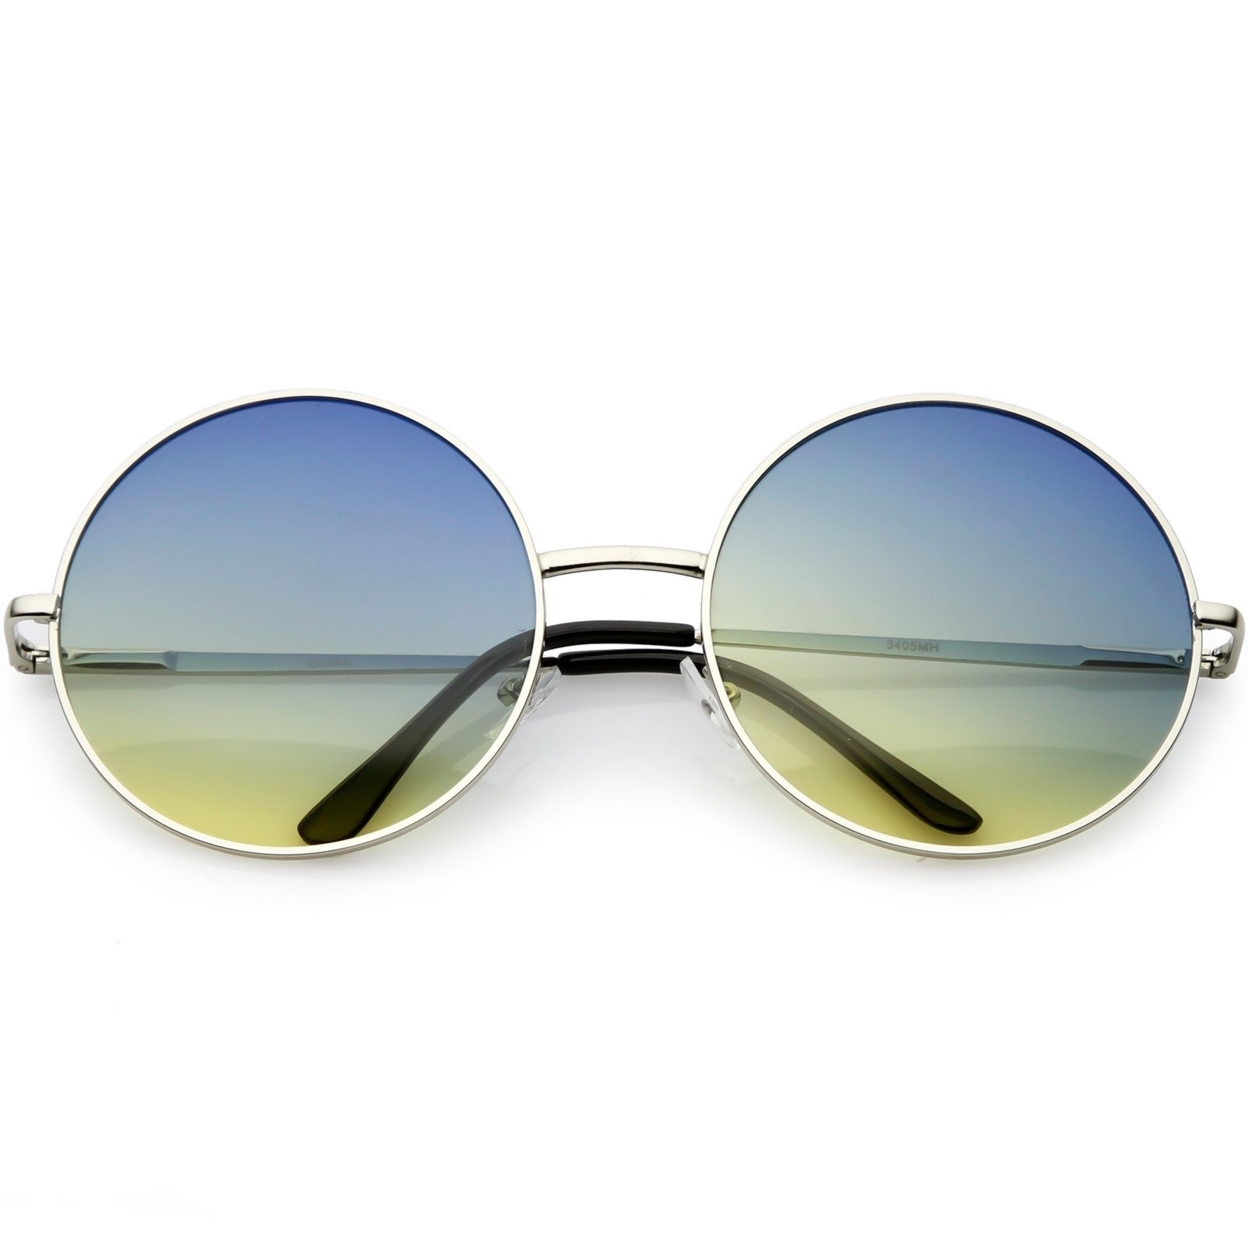 Retro Oversize Circle Sunglasses Thin Metal Arms Color Gradient Lens 62mm - Silver / Brown Green